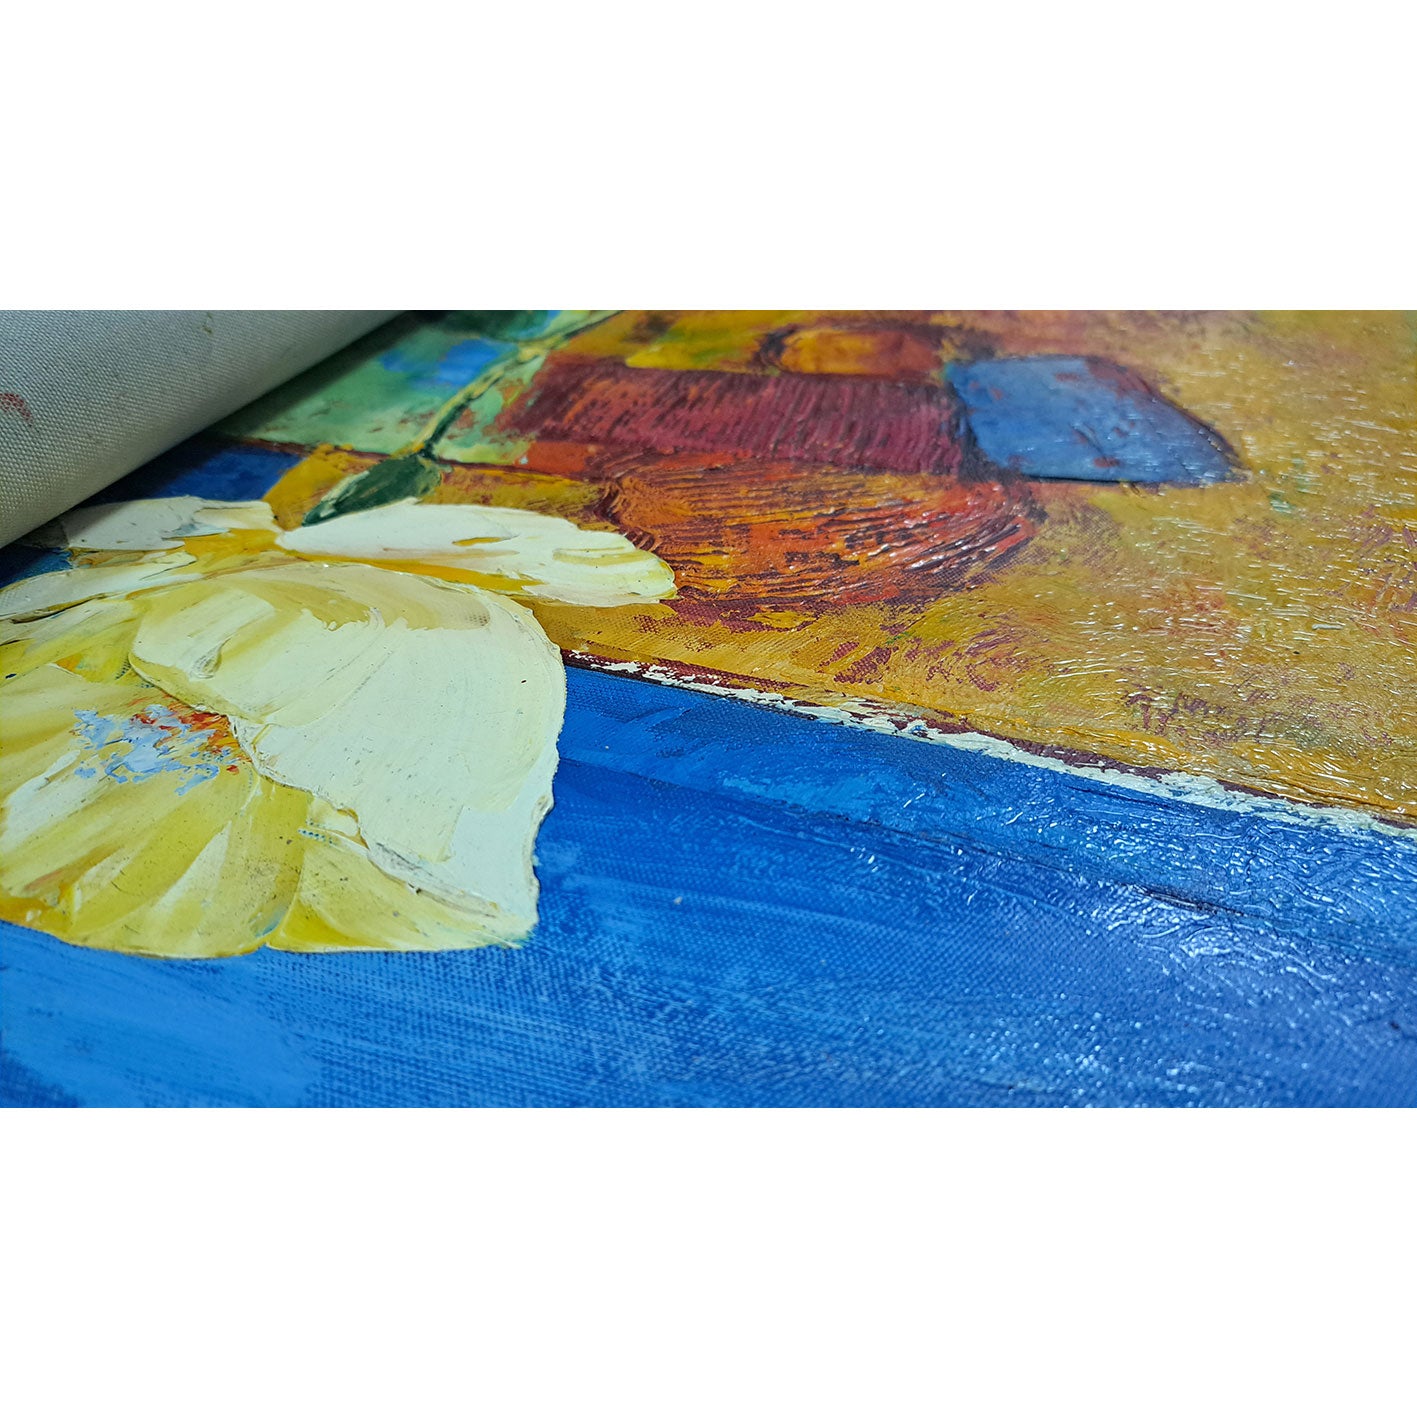 Abstract Flower Diptych Painting 50x60 cm [2 pieces]